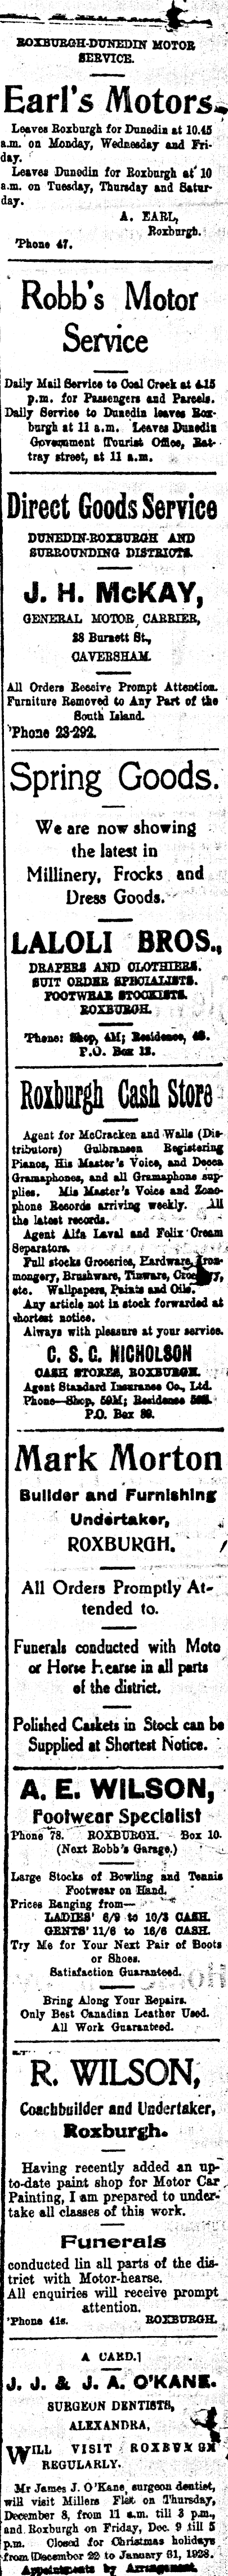 Papers Past Newspapers Mt Benger Mail 7 December 1927 Page 2 Advertisements Column 5